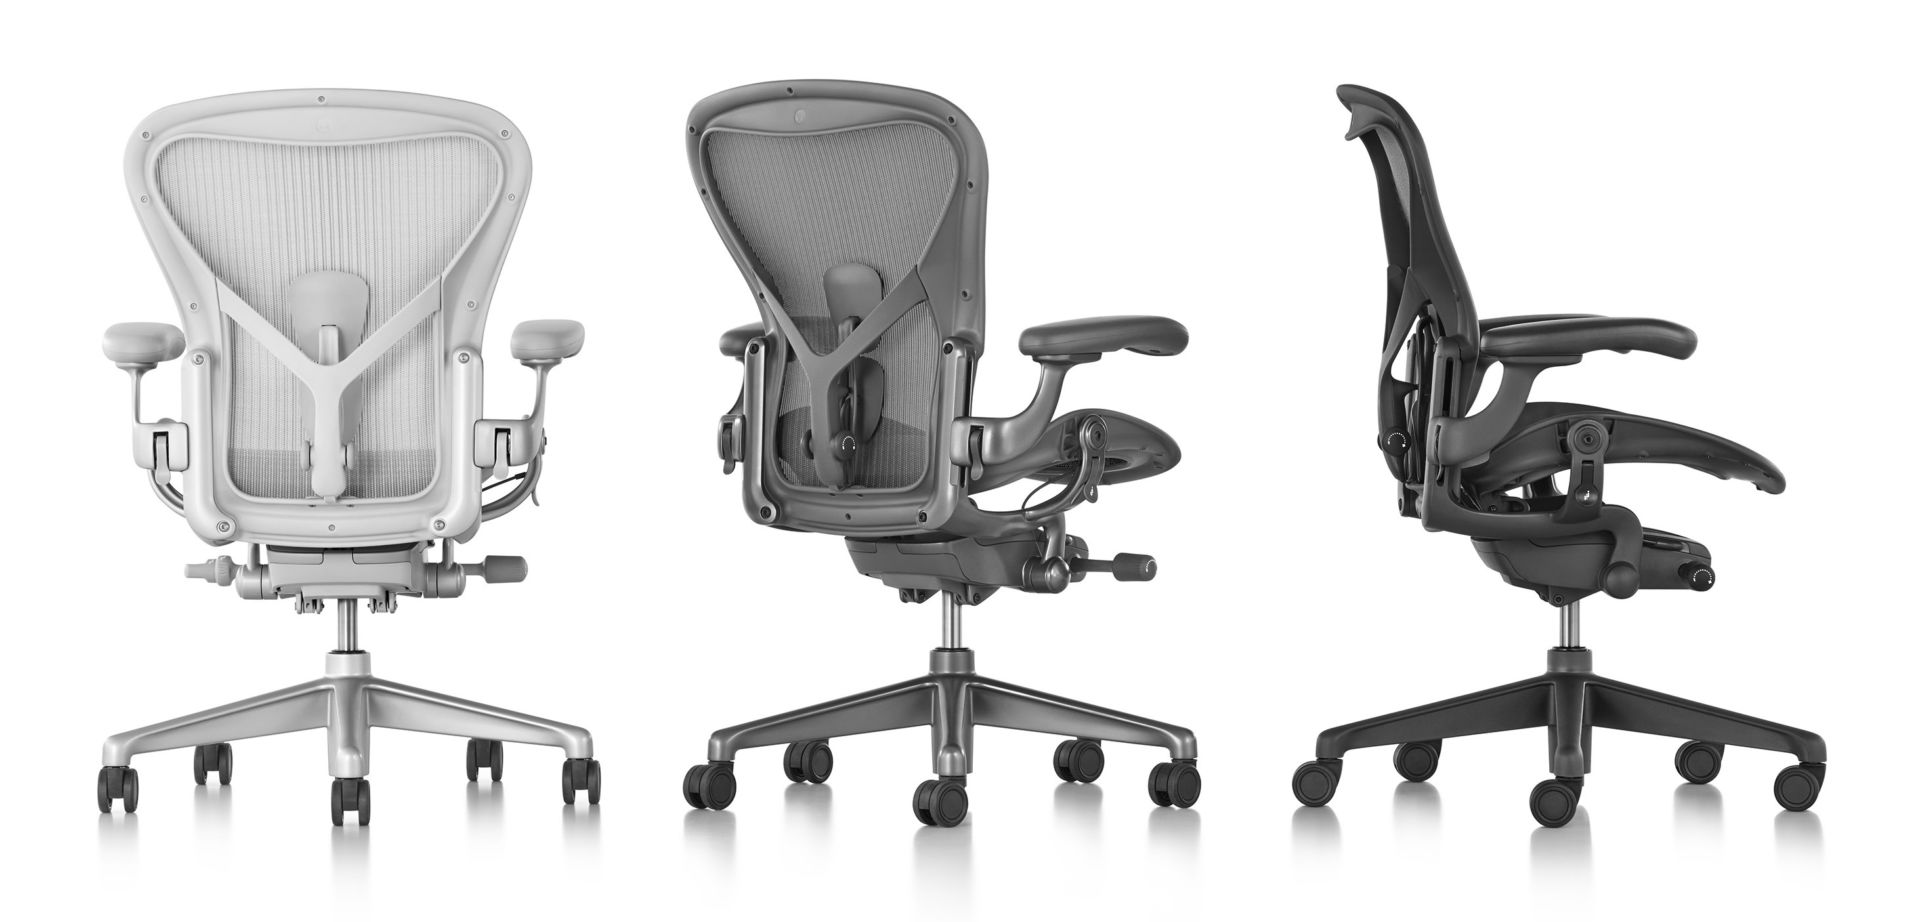 Remastered Aeron Chair Review